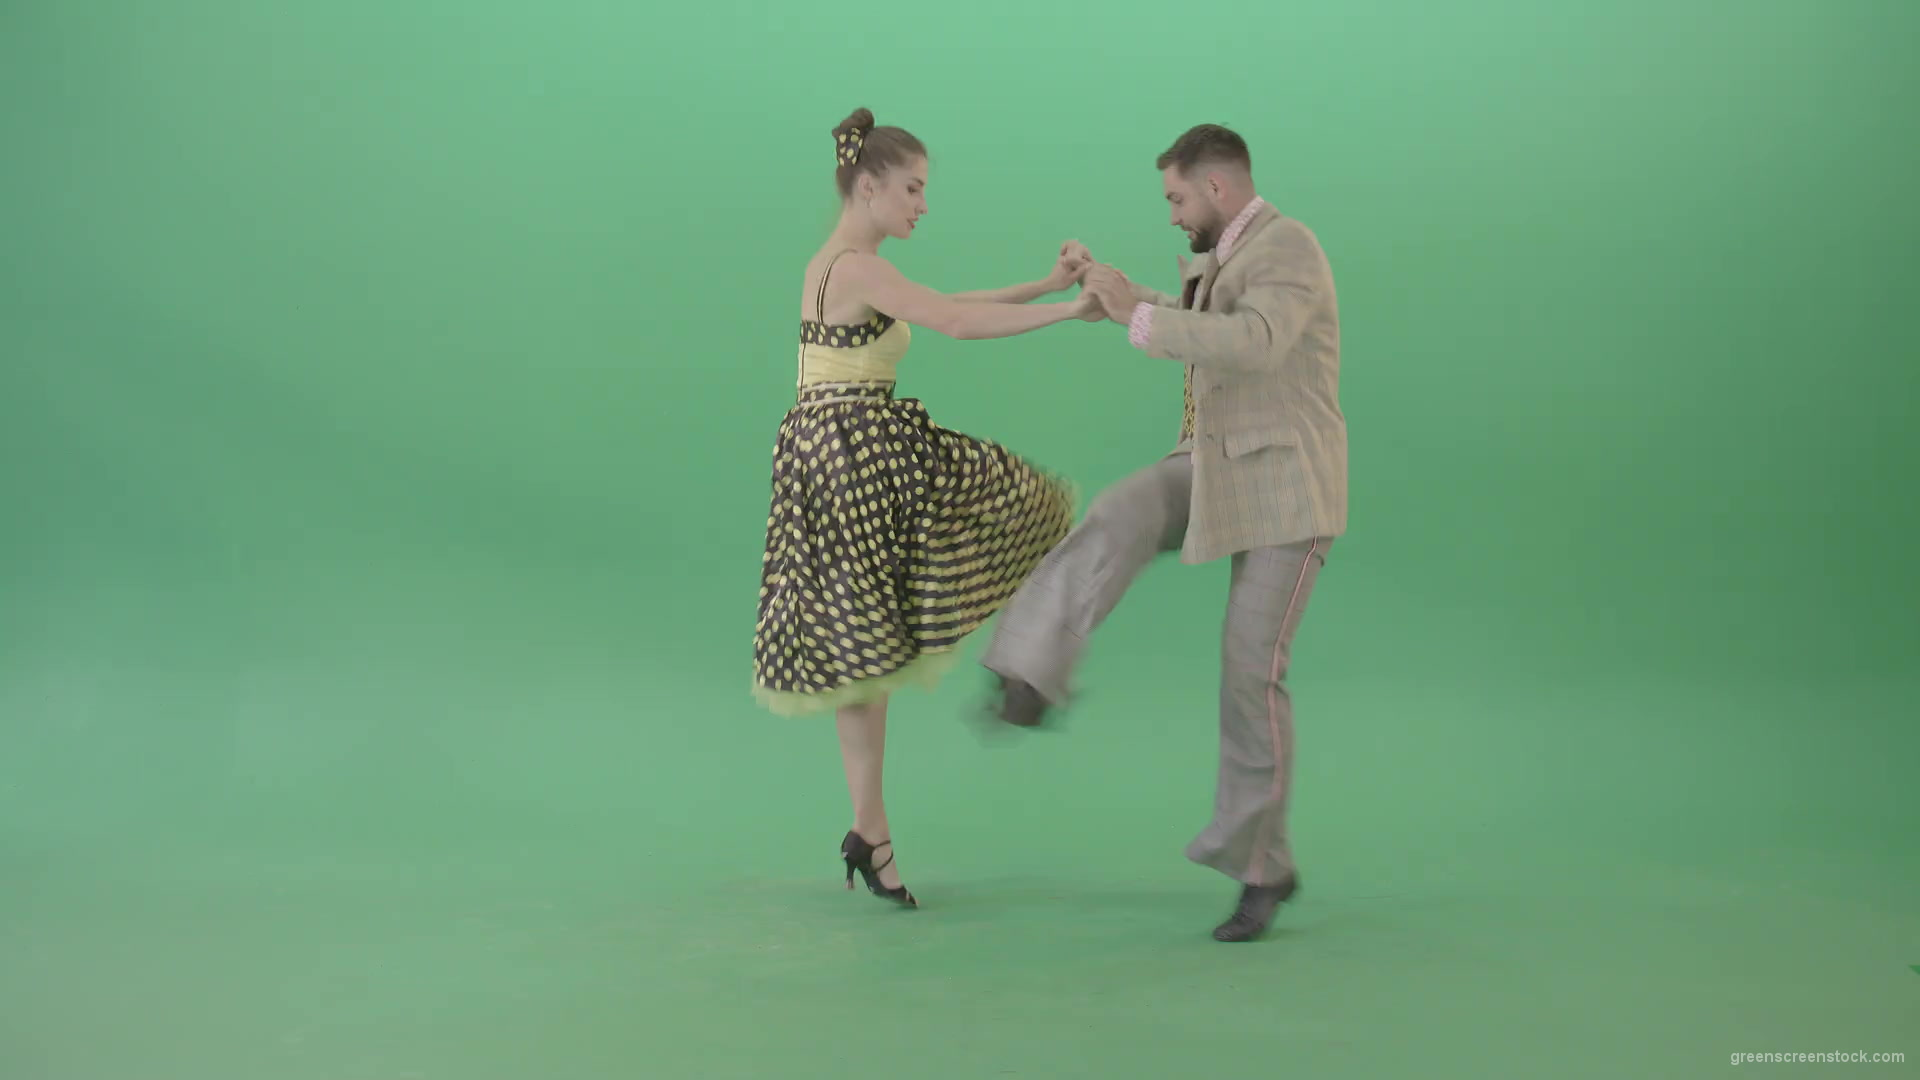 Lovely-couple-jumping-in-Boogie-woogie-dance-isolated-on-Green-Screen-4K-Video-Stock-Footage-1920_001 Green Screen Stock